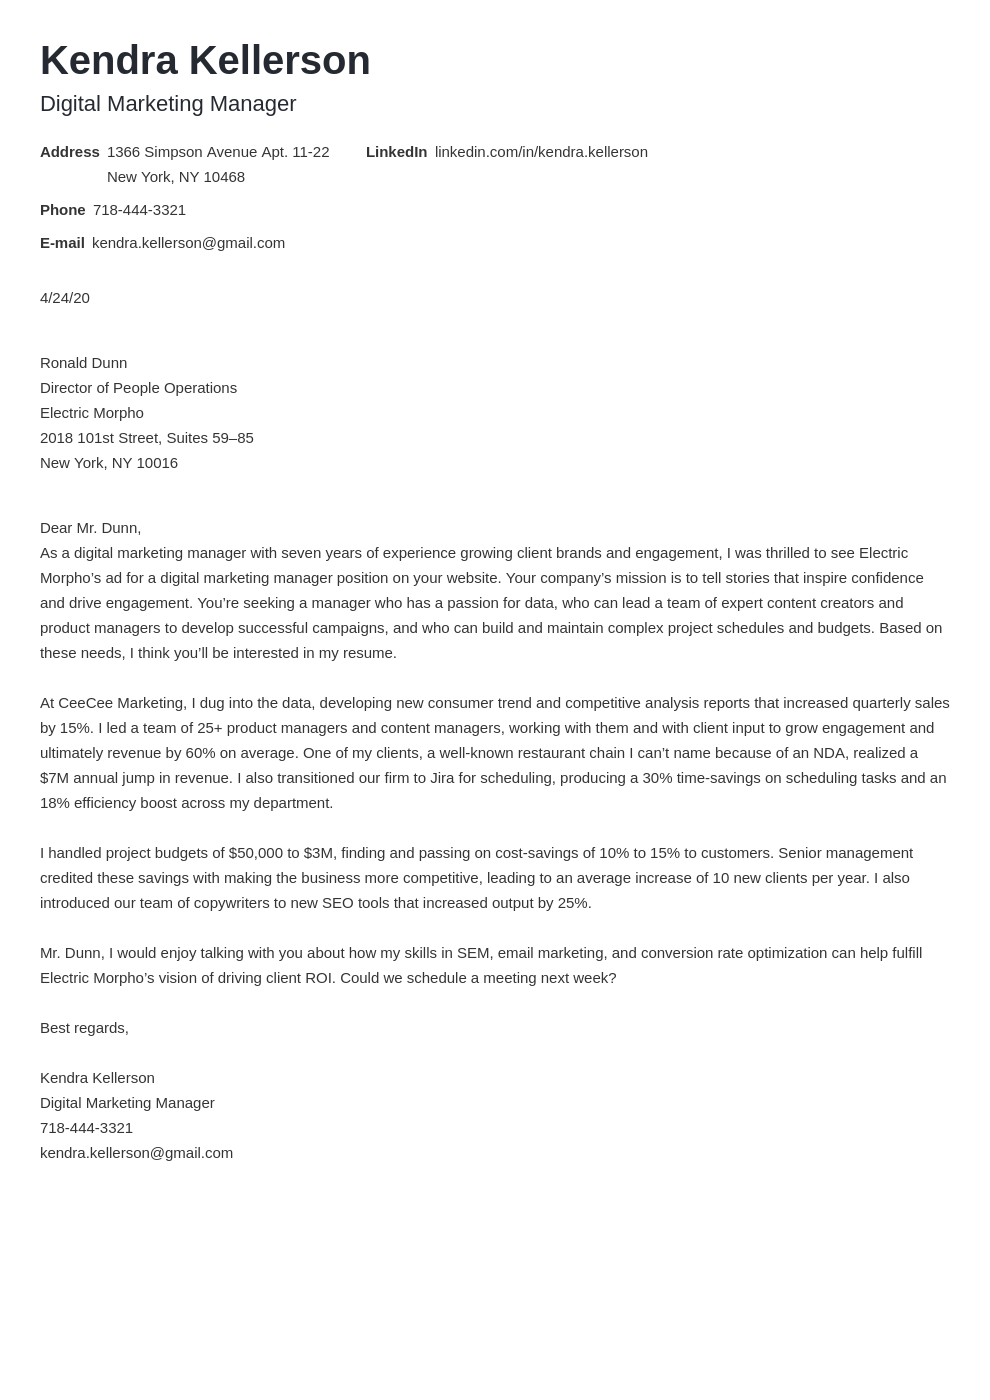 sample cover letter for a marketing manager